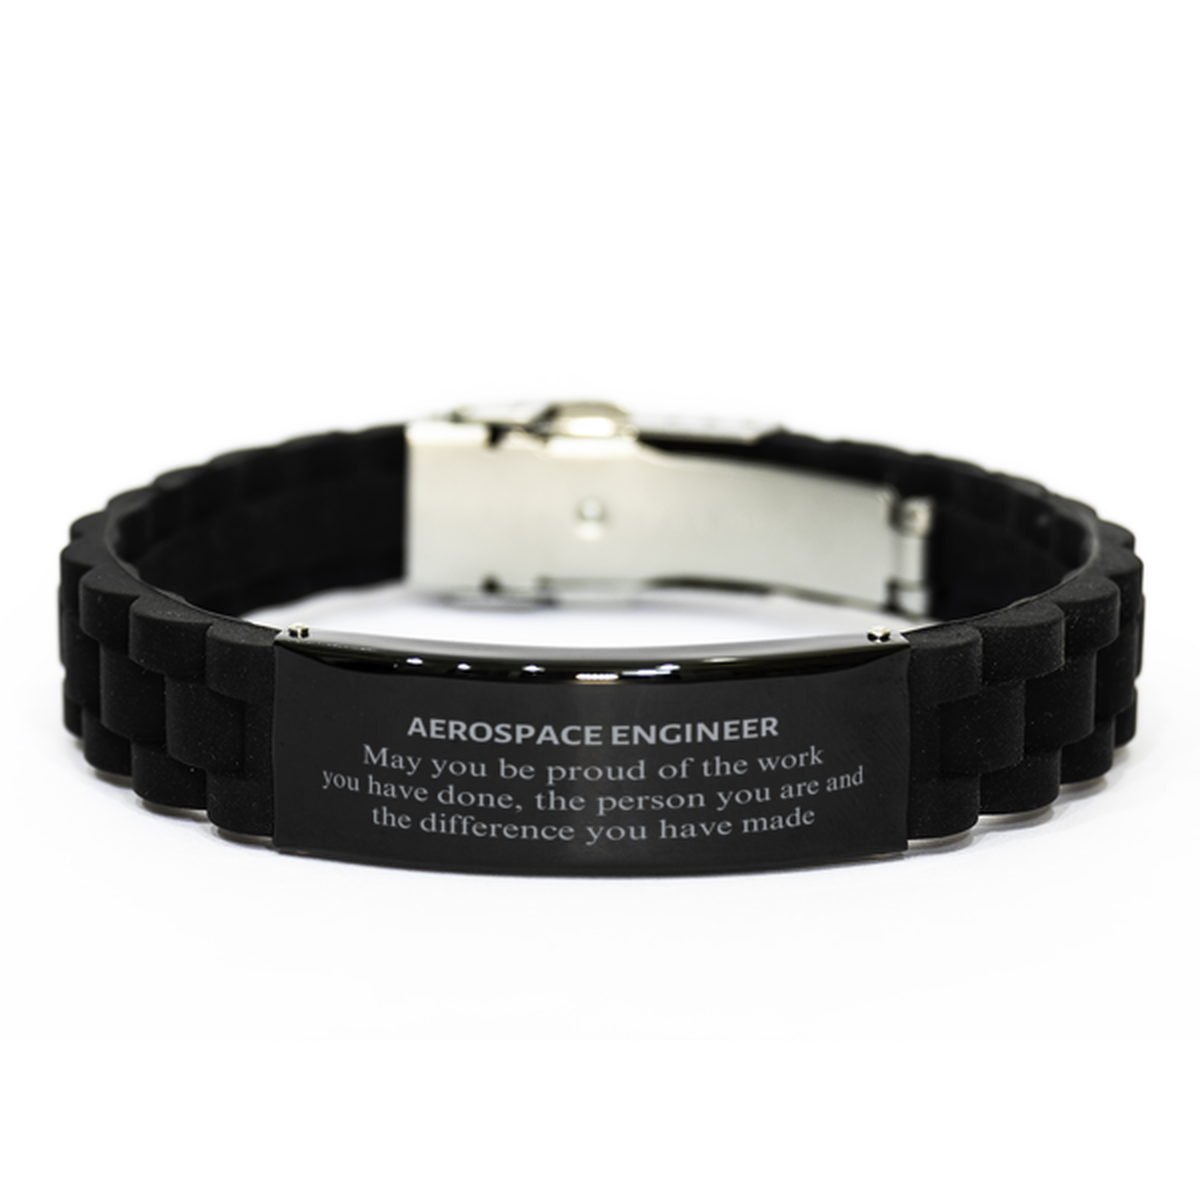 Aerospace Engineer May you be proud of the work you have done, Retirement Aerospace Engineer Black Glidelock Clasp Bracelet for Colleague Appreciation Gifts Amazing for Aerospace Engineer